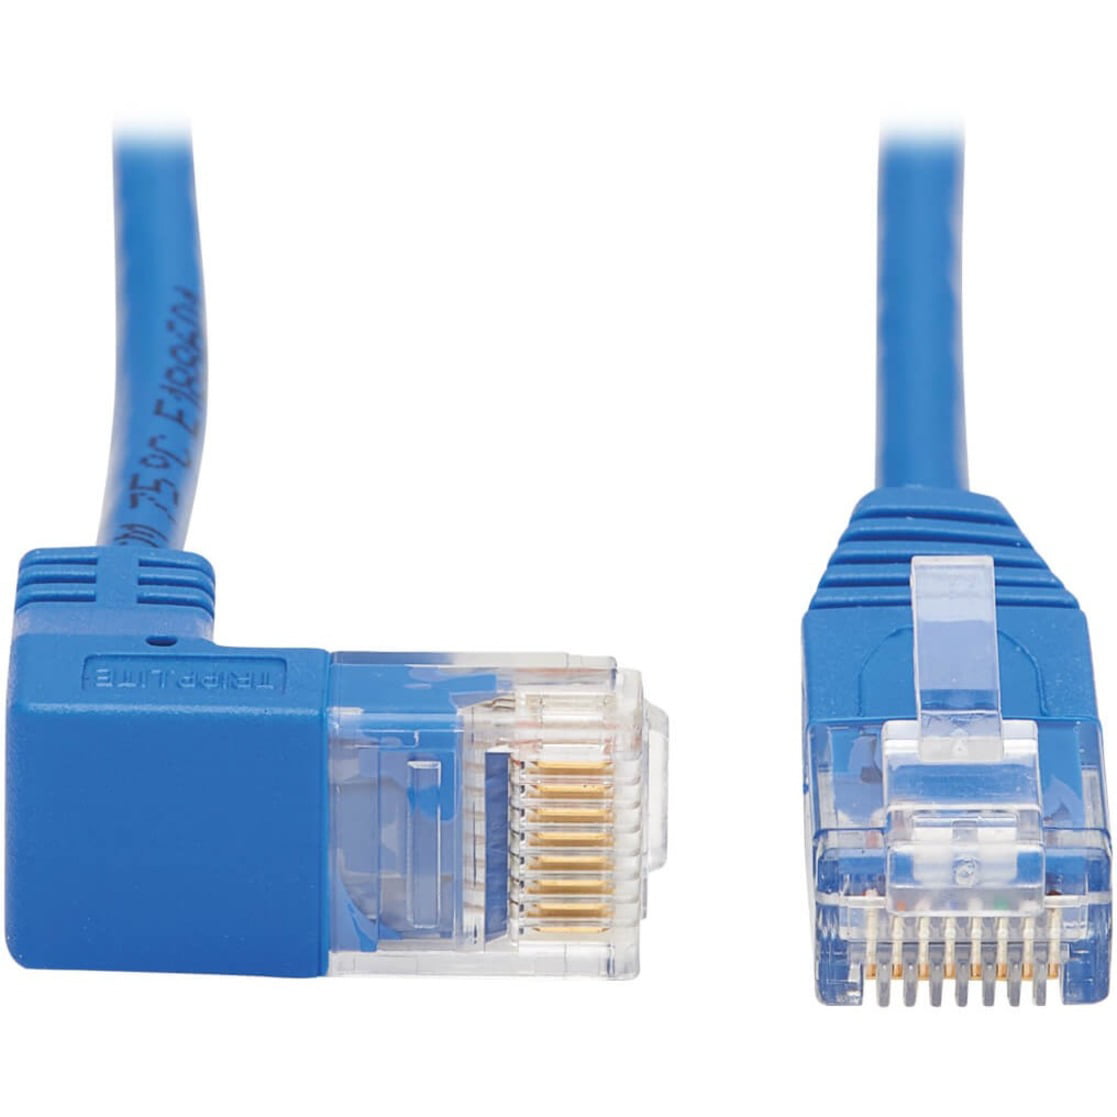 Lifetime RJ45 Feed Pass Through Gold Connectors Crimp Ends 8P8C UTP Network Plug CAT5 CAT5E CAT6 Stranded Cable Solid Crystal Head 100 Pieces by TeleDirect 